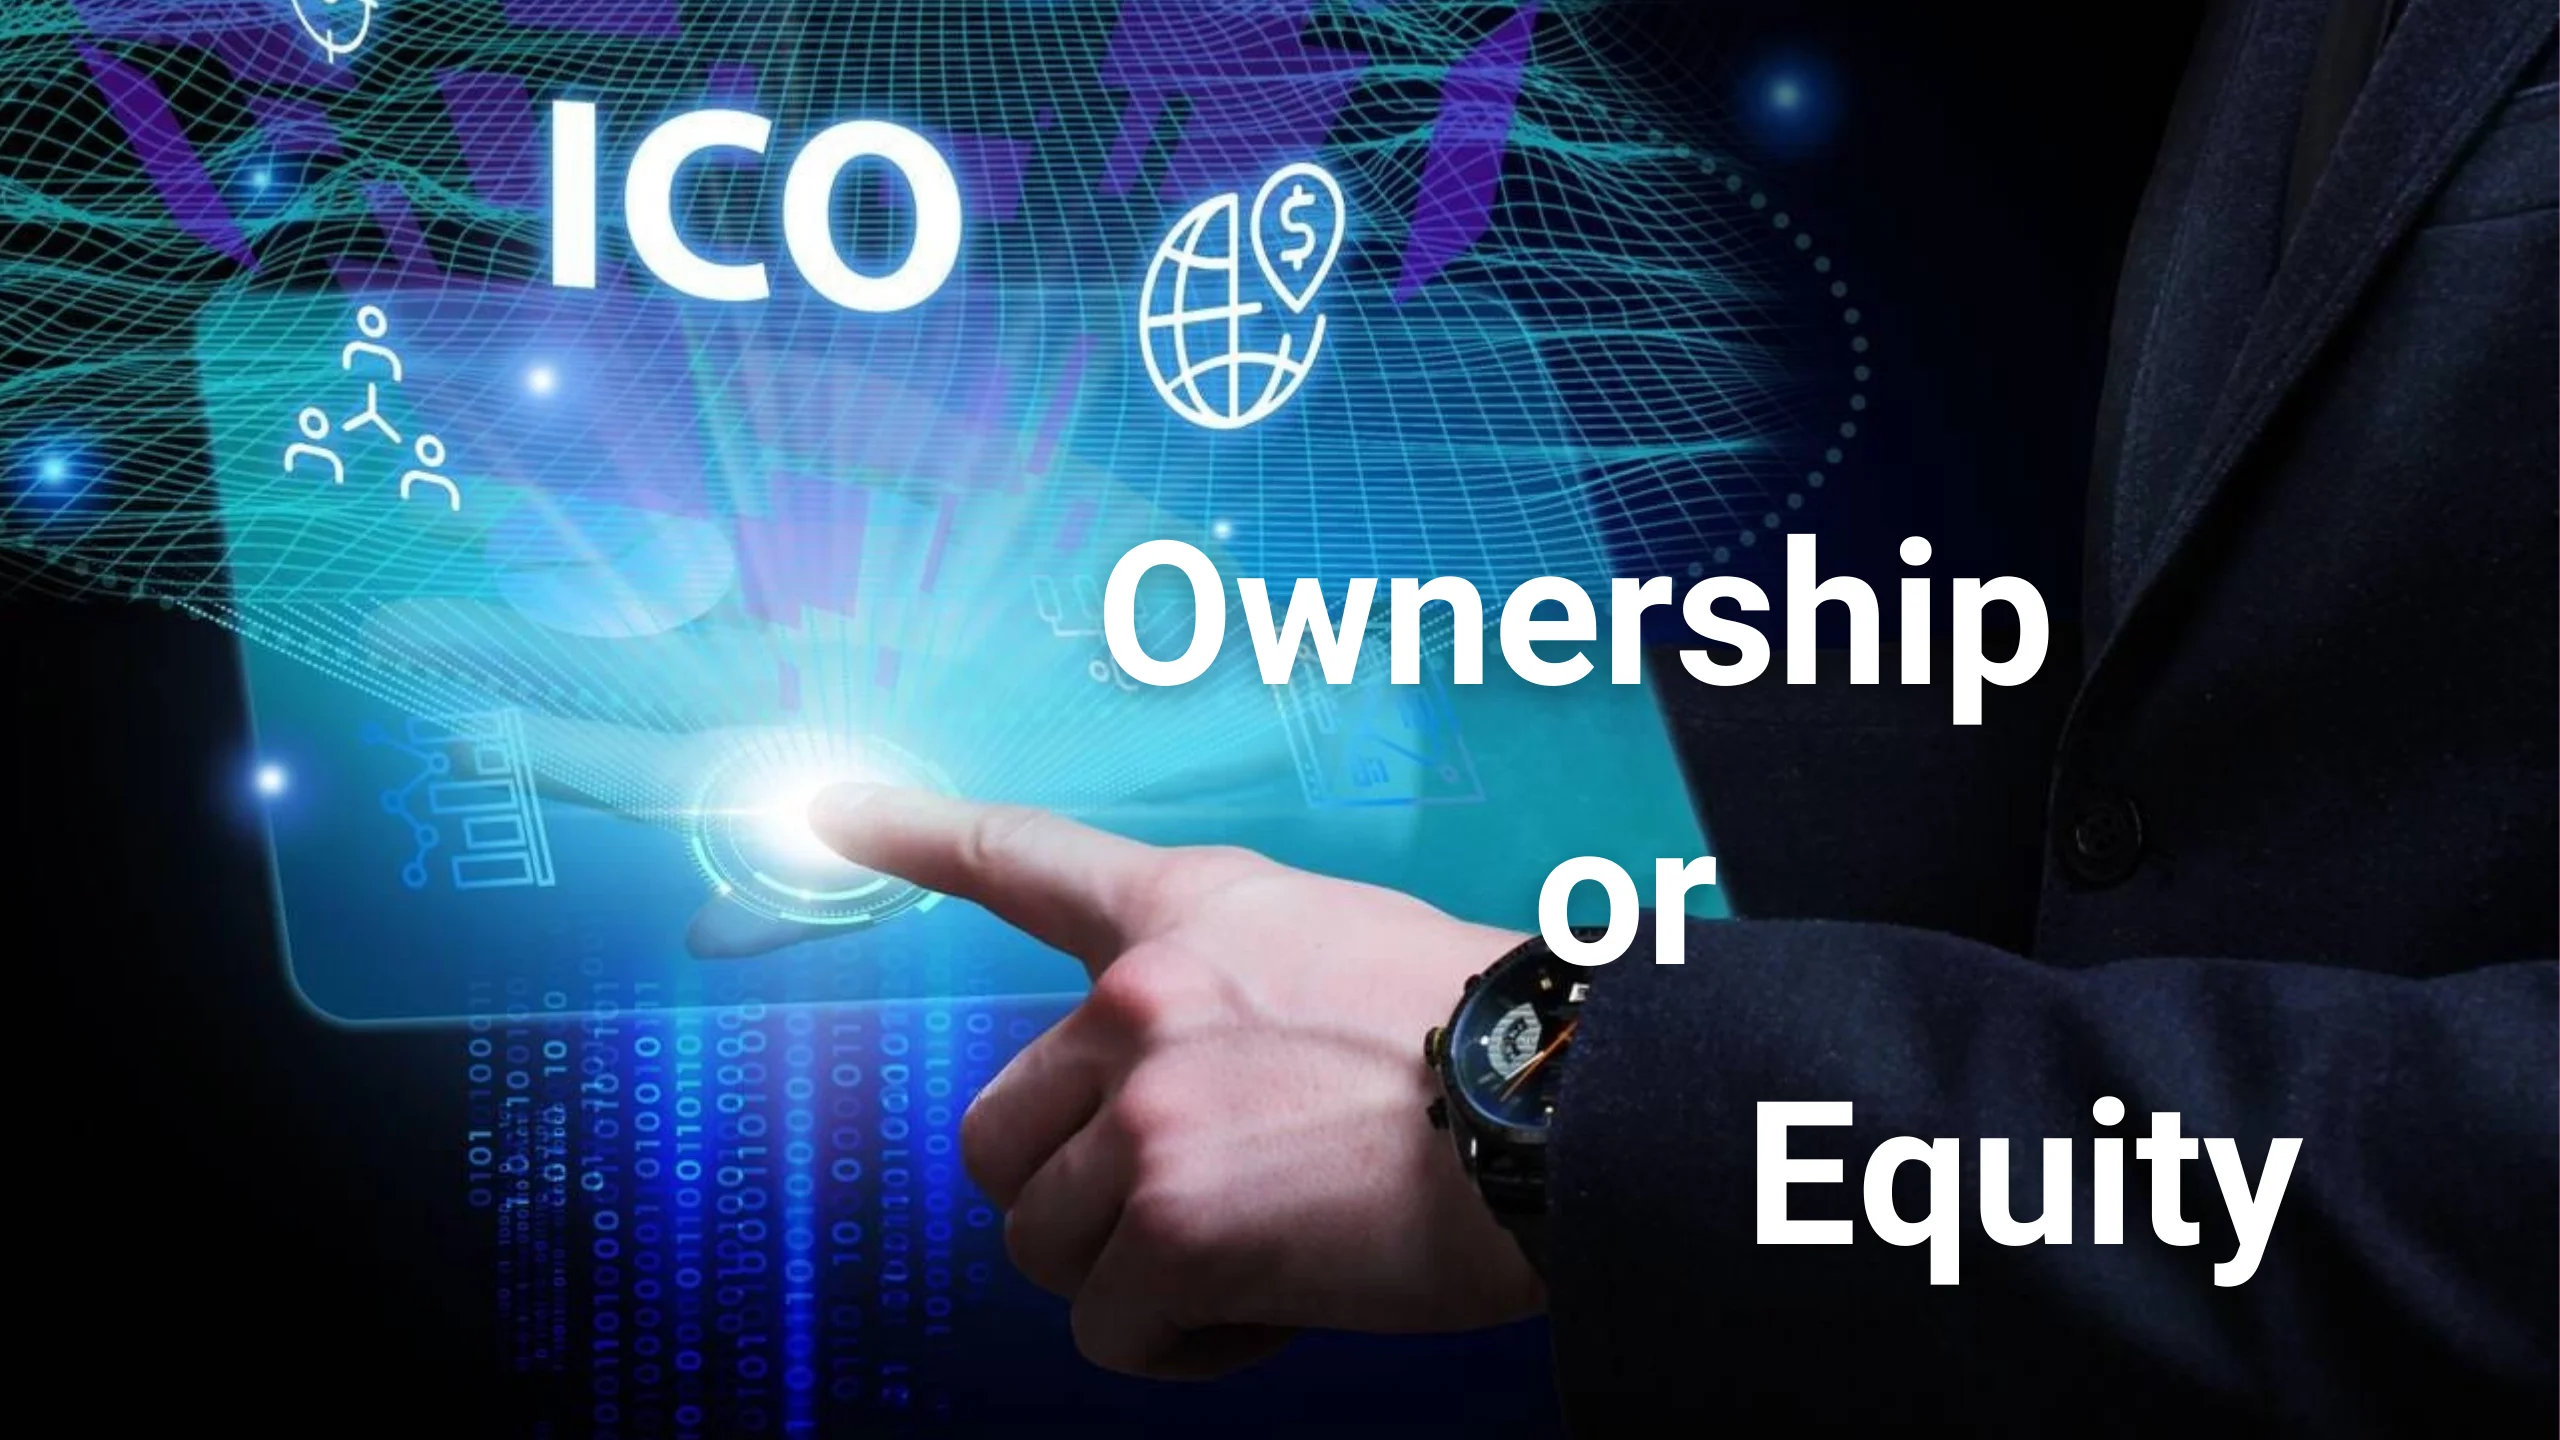 ICOs and Ownership: ICOs do not guarantee ownership or equity in the issuing project, focusing instead on utility tokens for access to products or services.